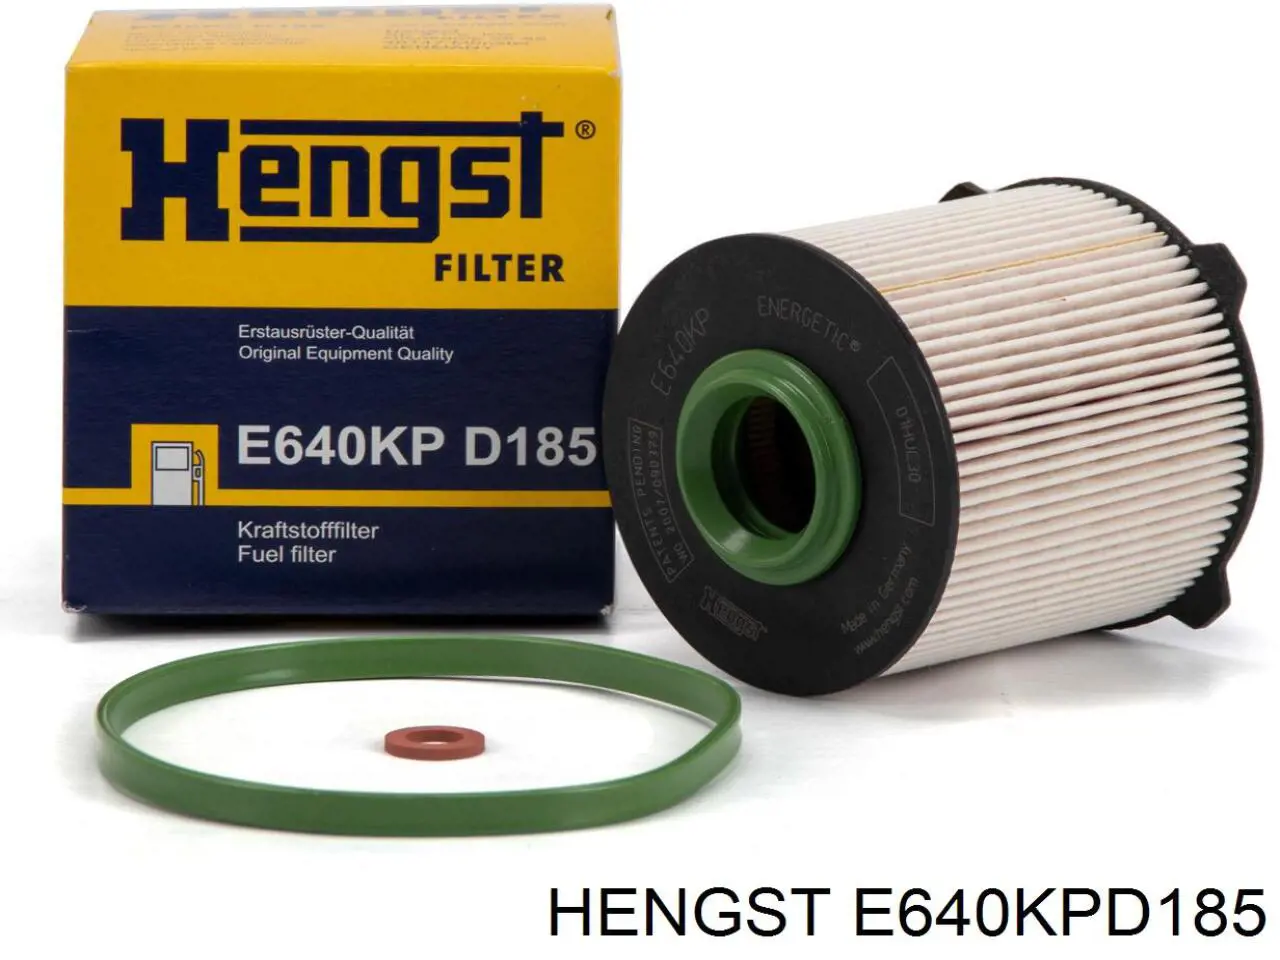 E640KPD185 Hengst filtro combustible